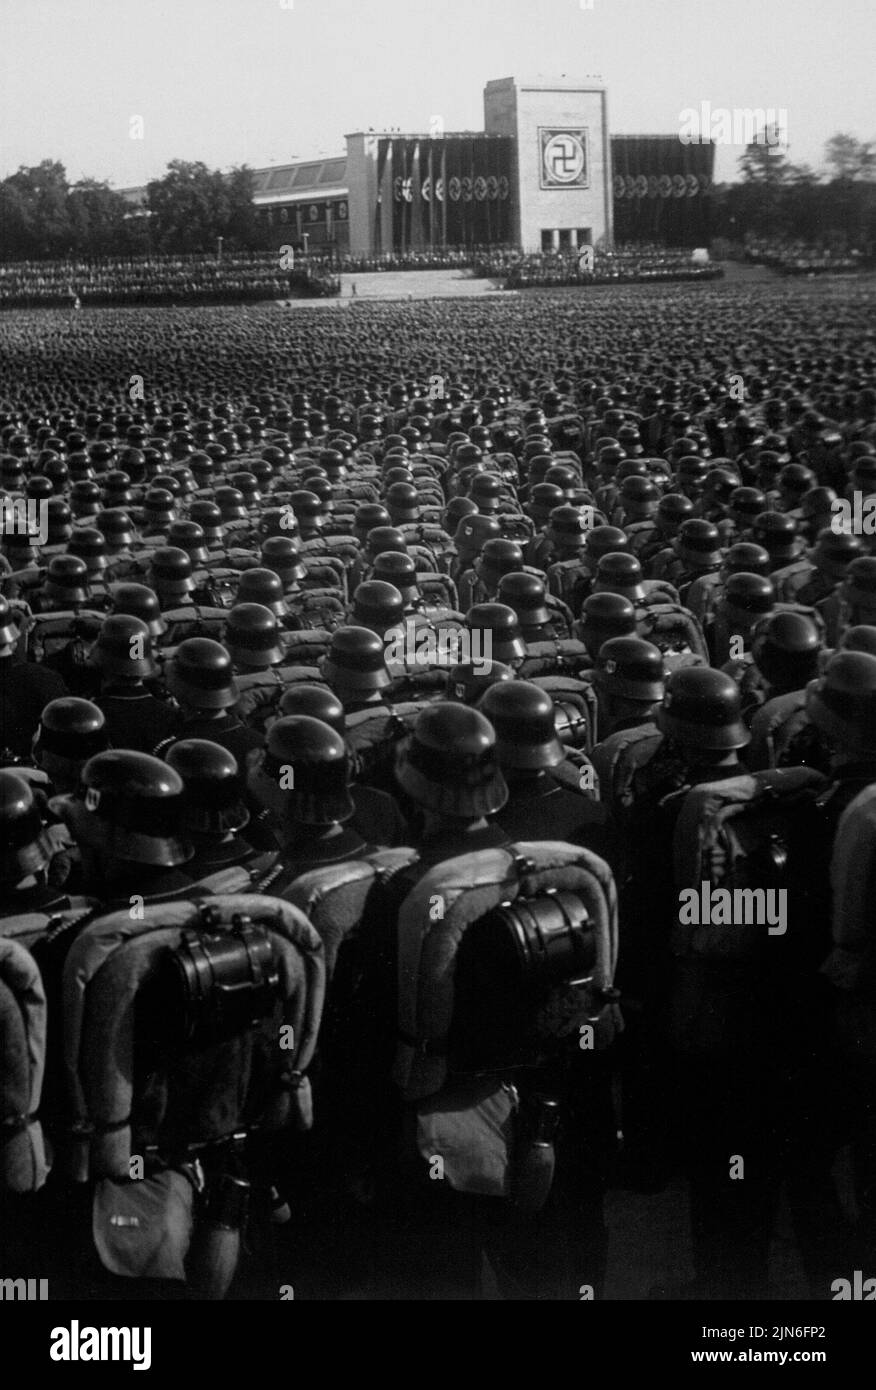 NUREMBURG, GERMANY - 09 November 1935 - Overview of the mass roll call of SA, SS and NSKK troops at Nuremberg, Germany during the rise of the Nazis - Stock Photo